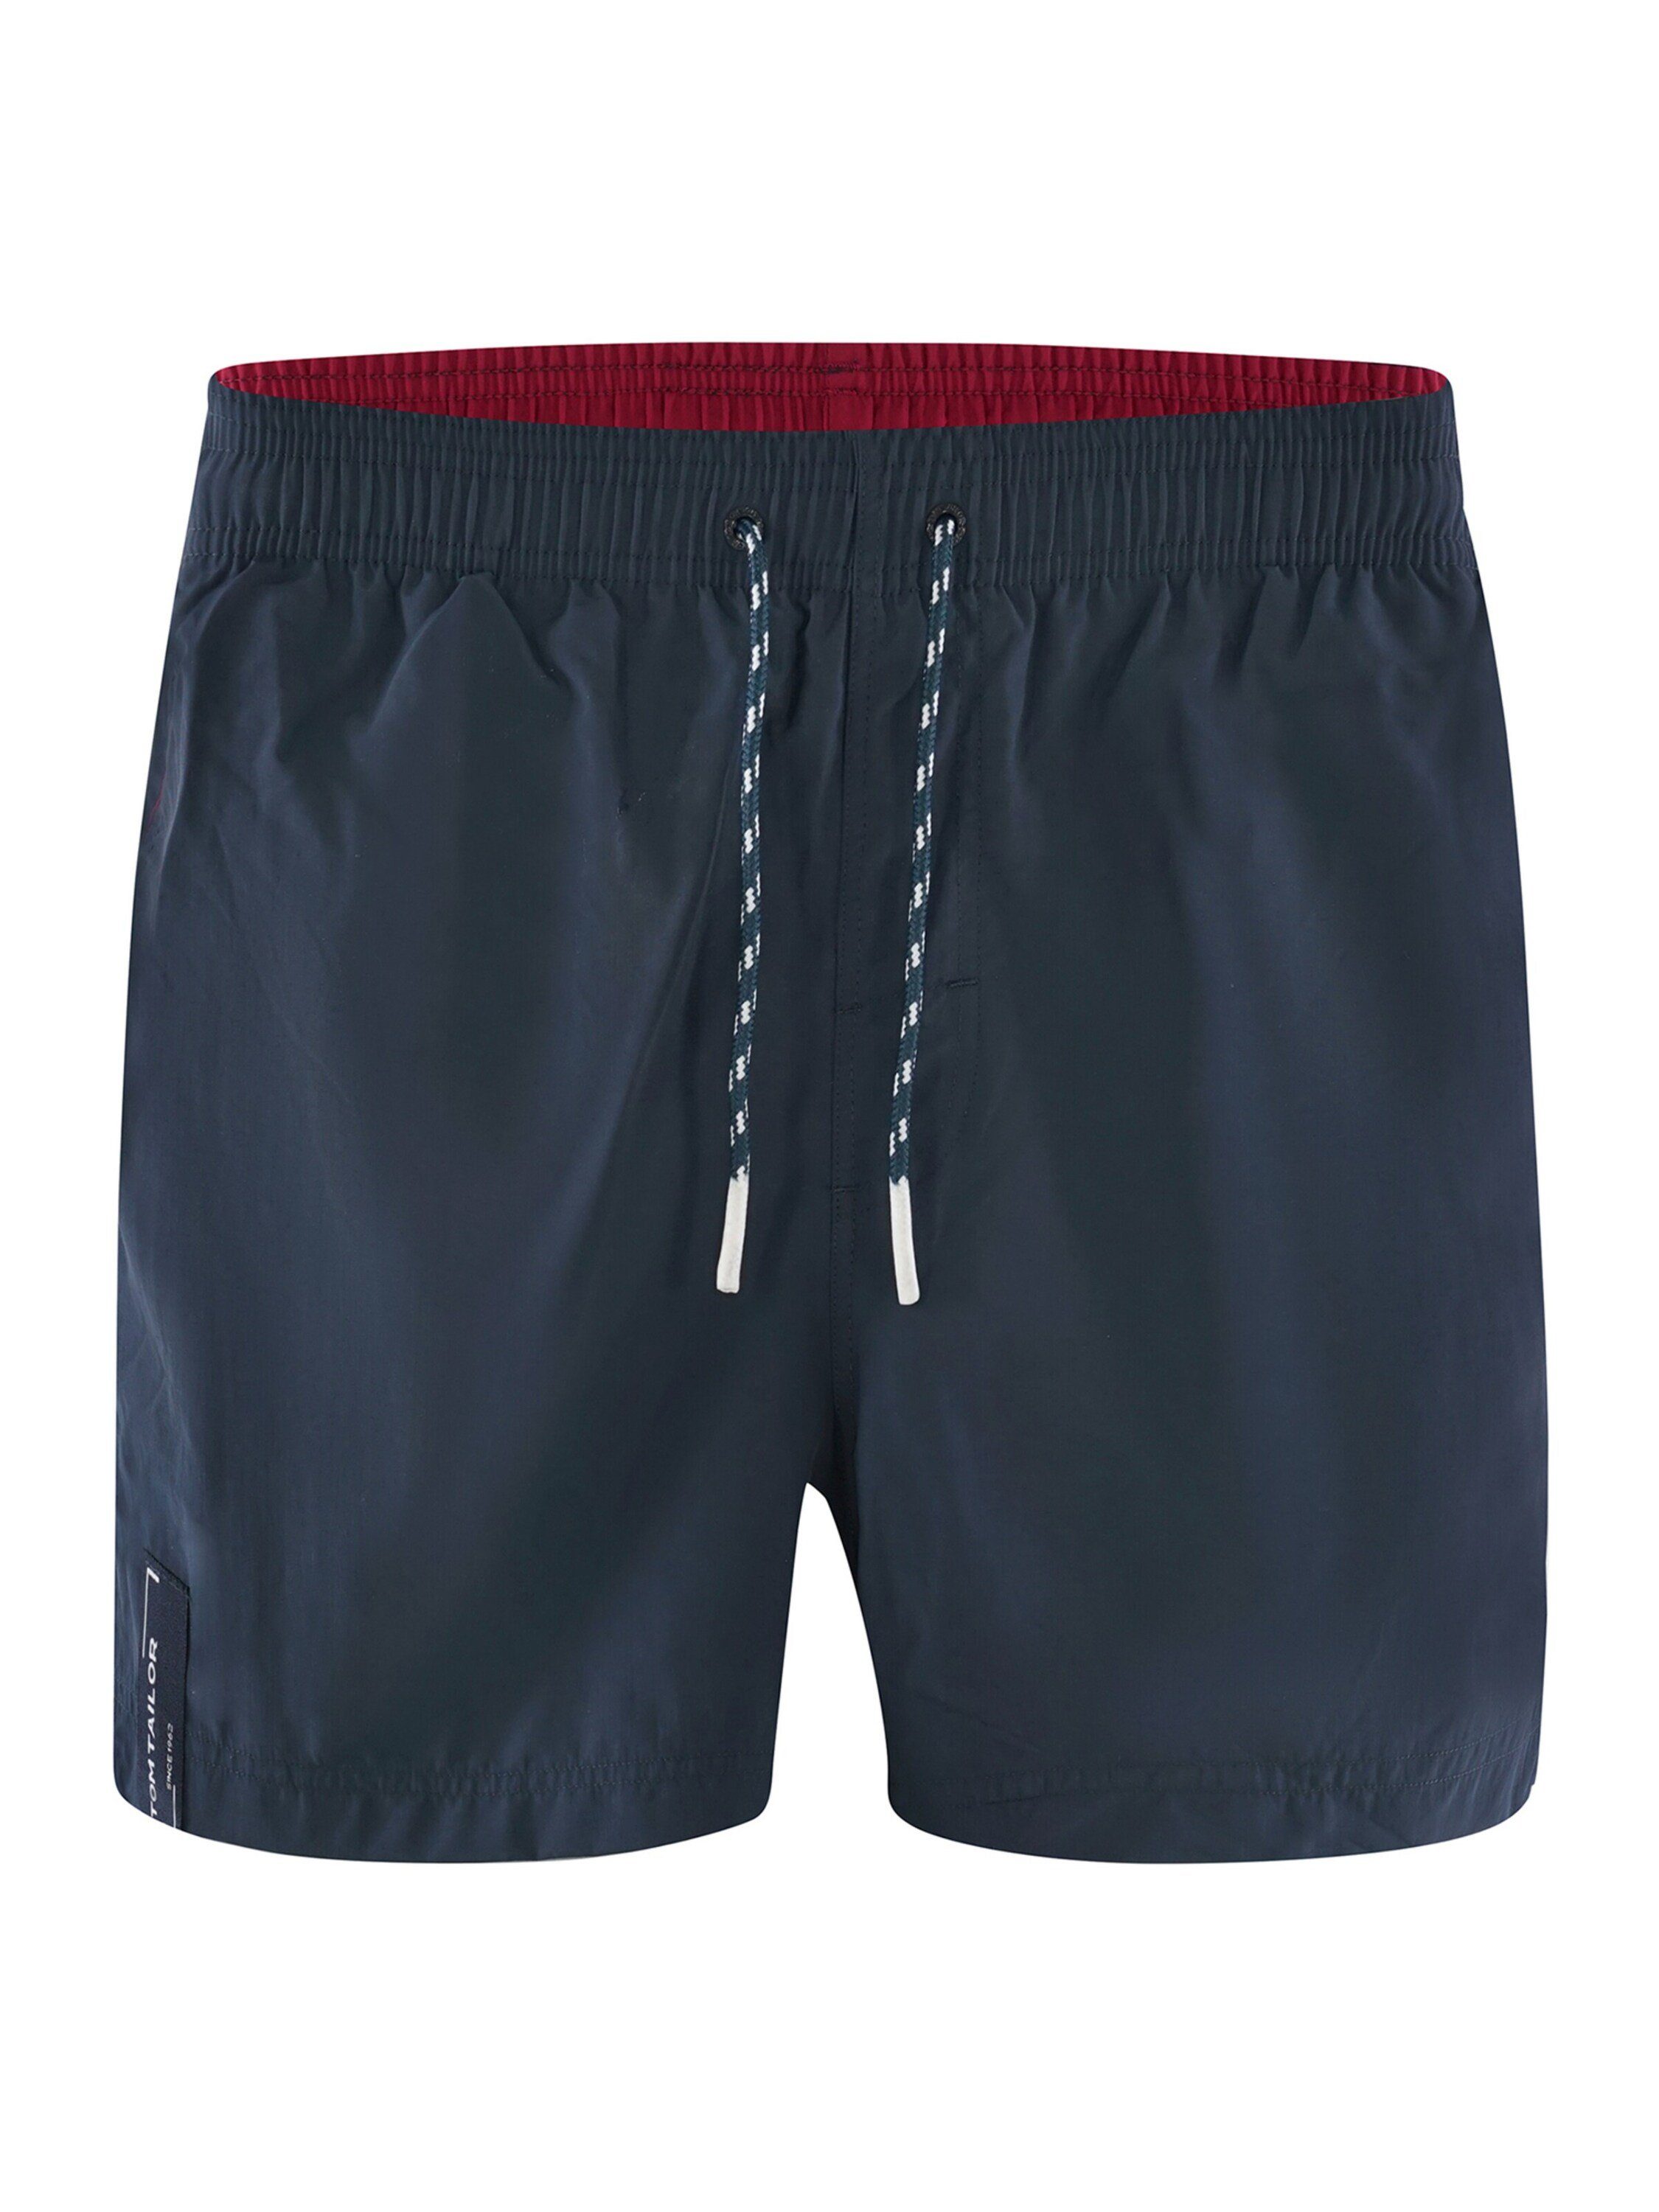 TOM TAILOR Badeshorts PIET navy french (1-St)